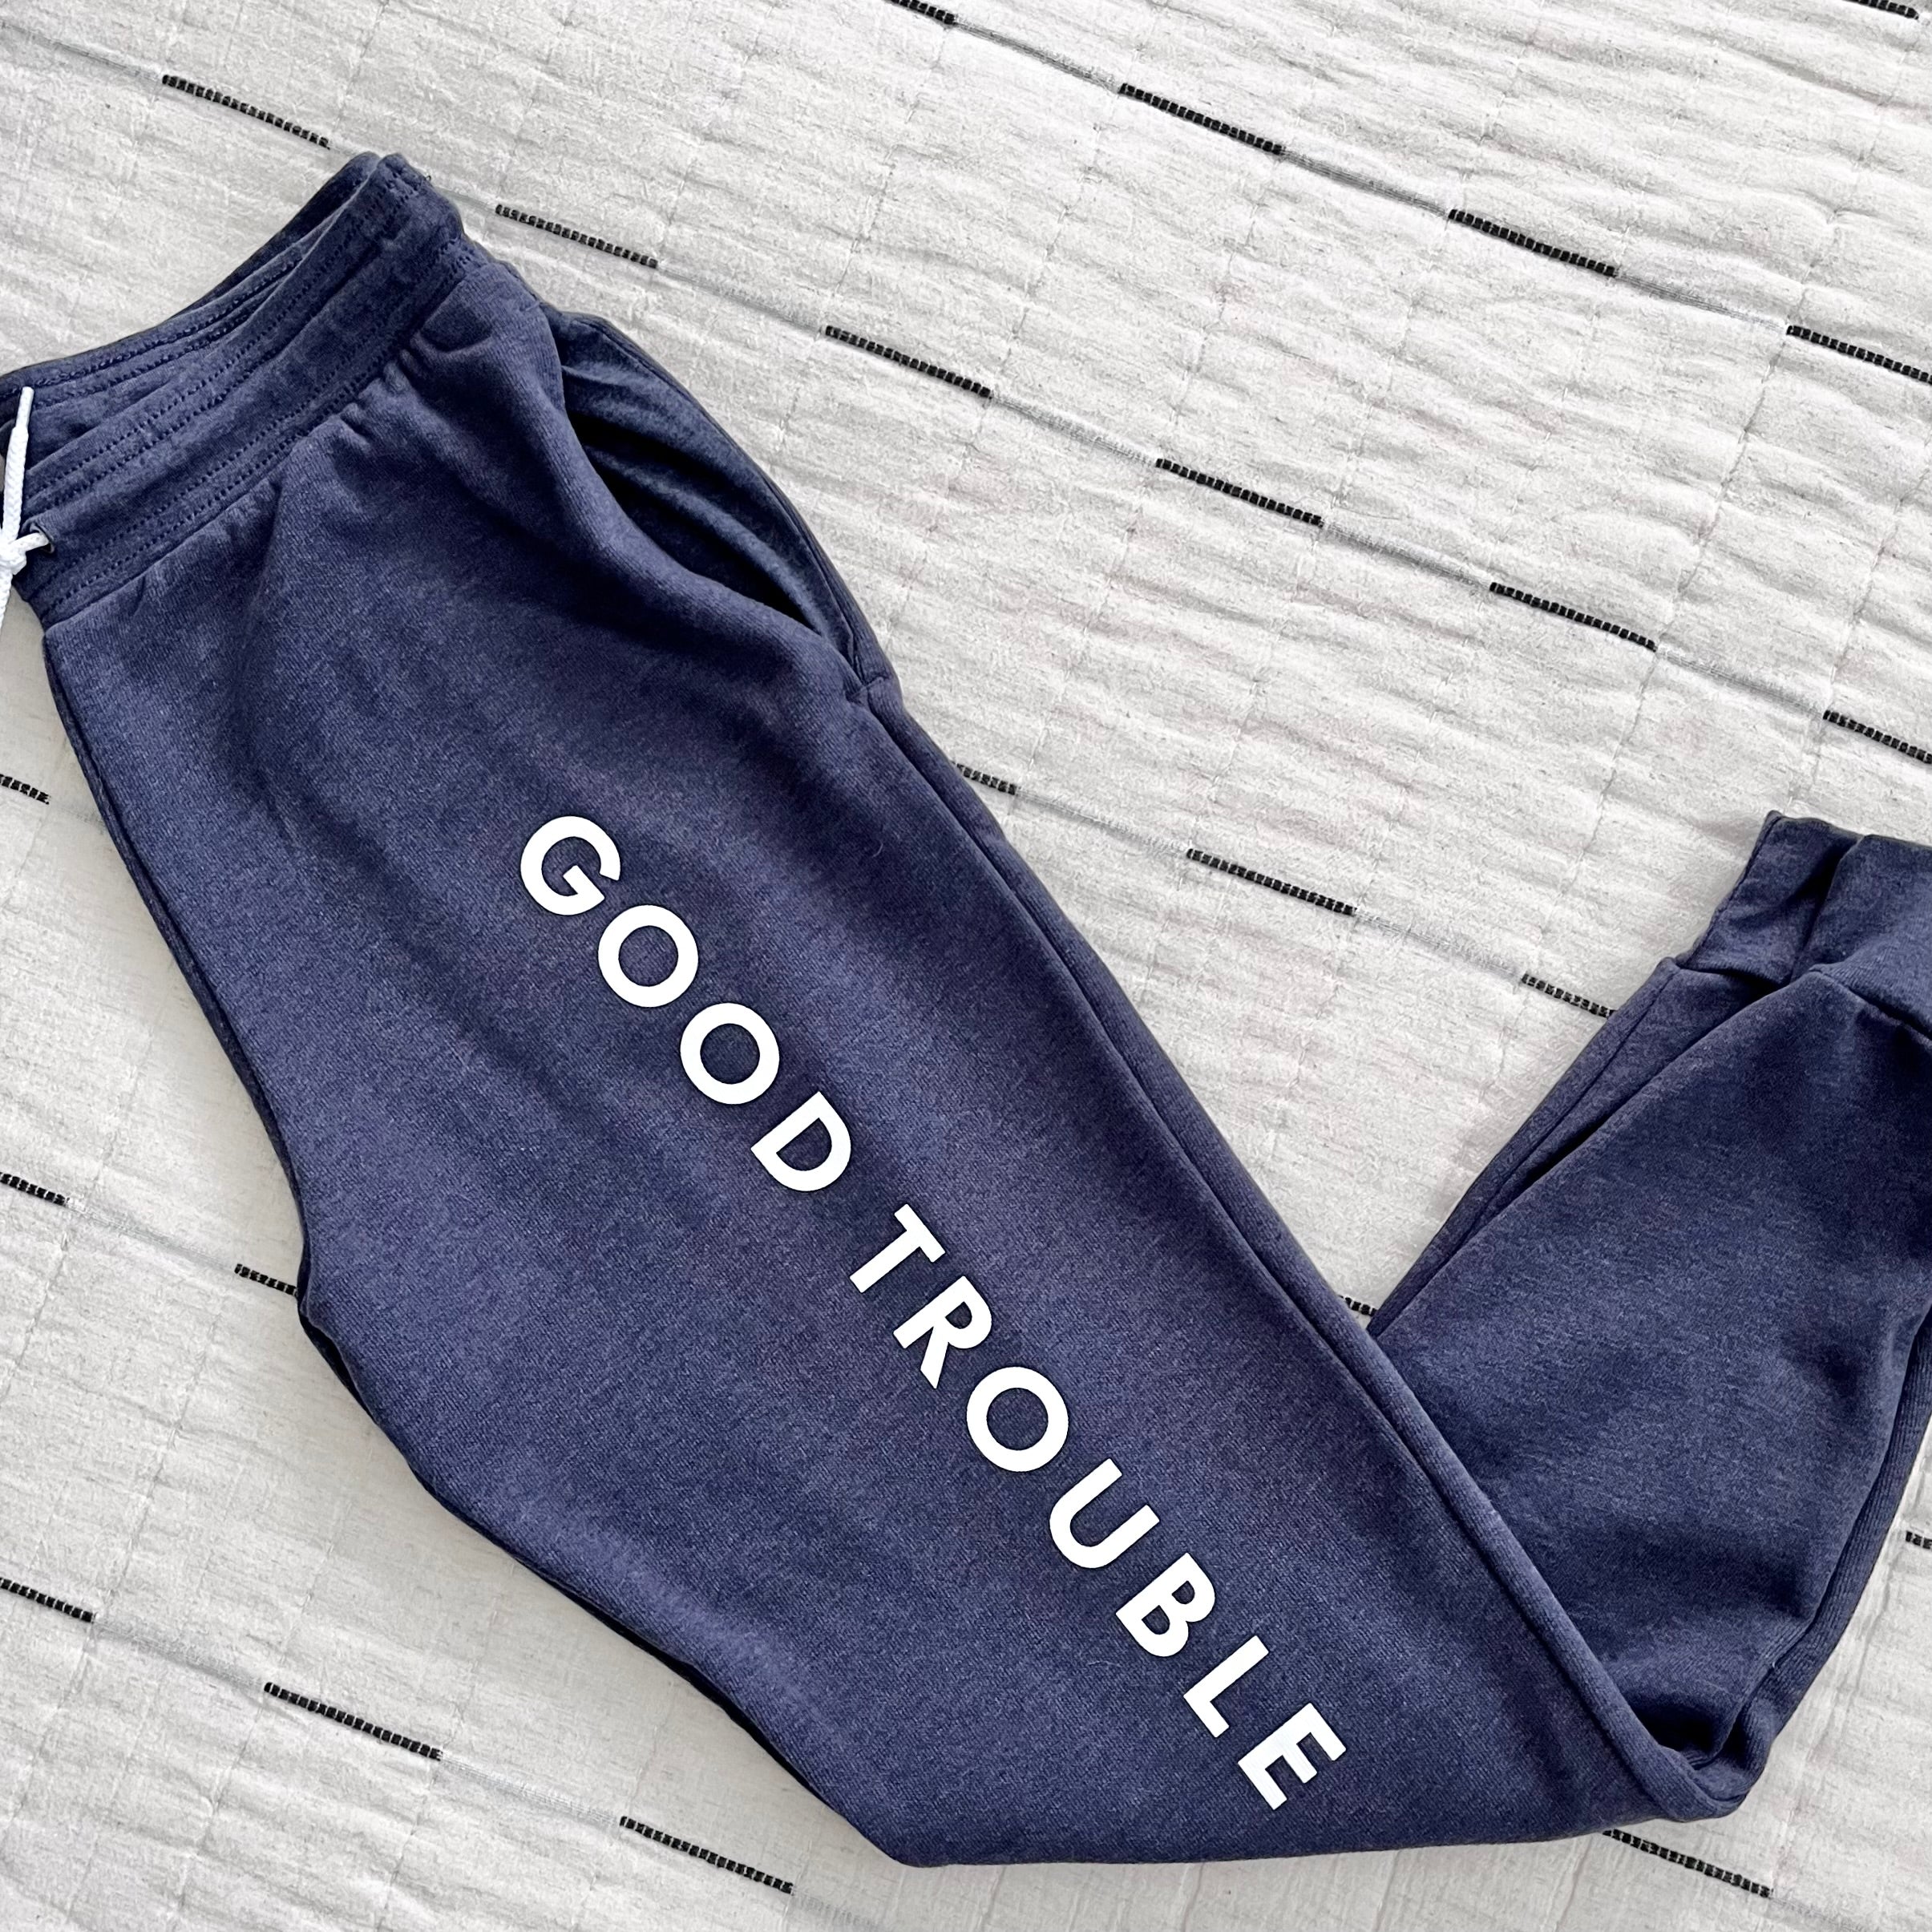 Good Trouble Joggers